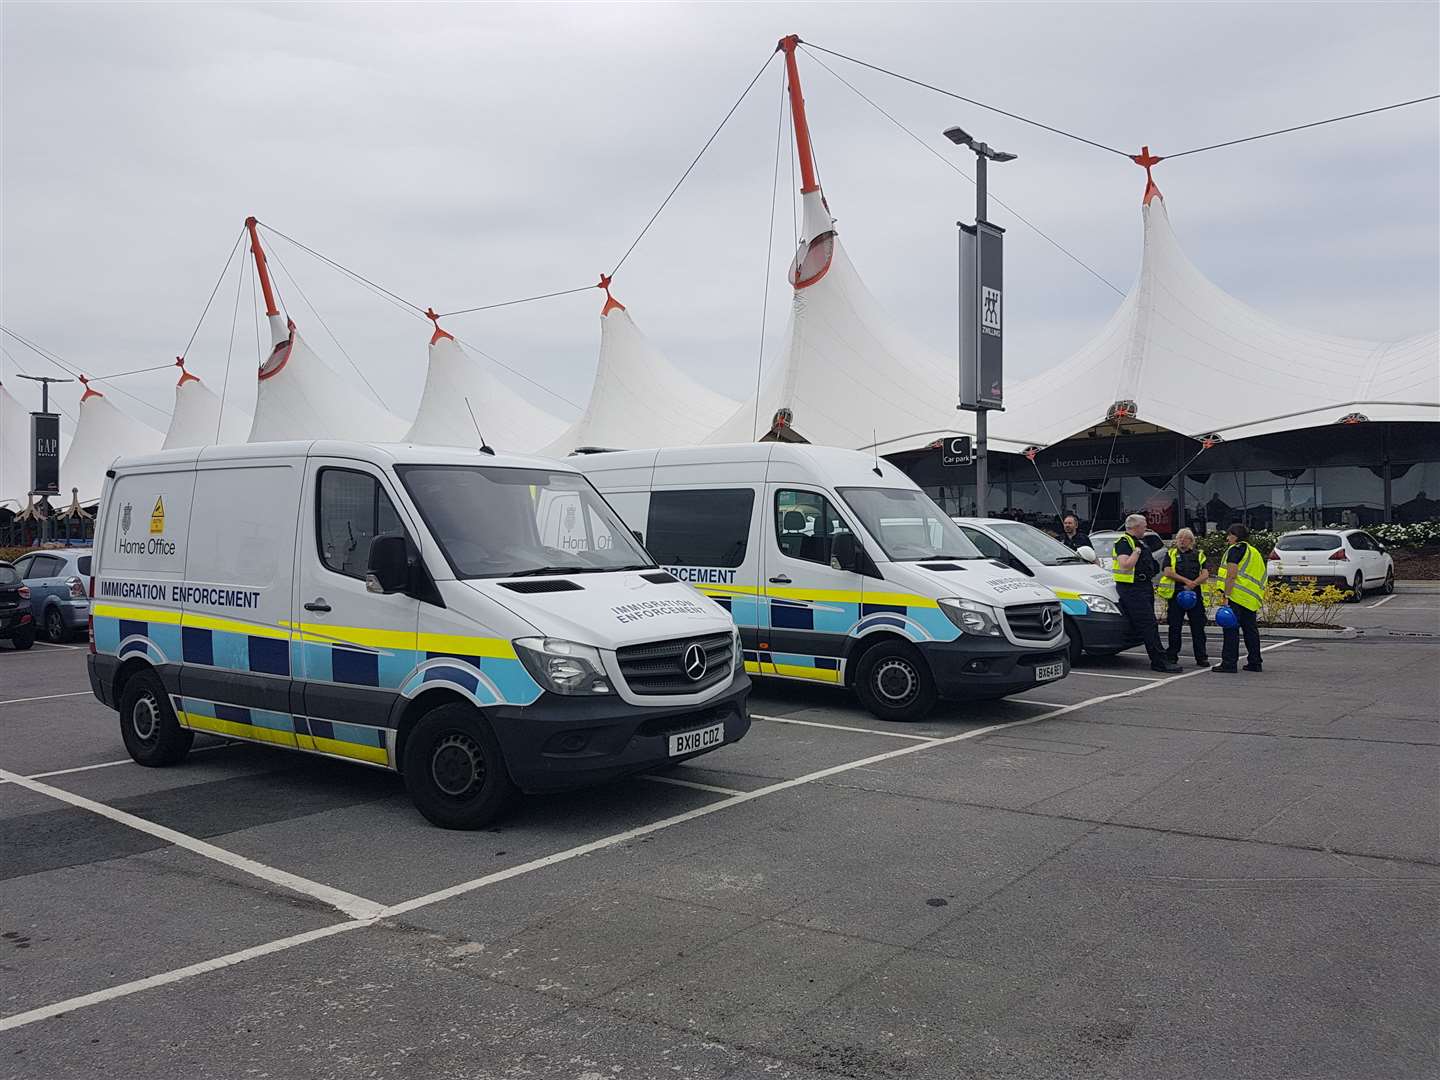 Three Home Office vehicles are currently stationed in the Ashford Designer Outlet car park